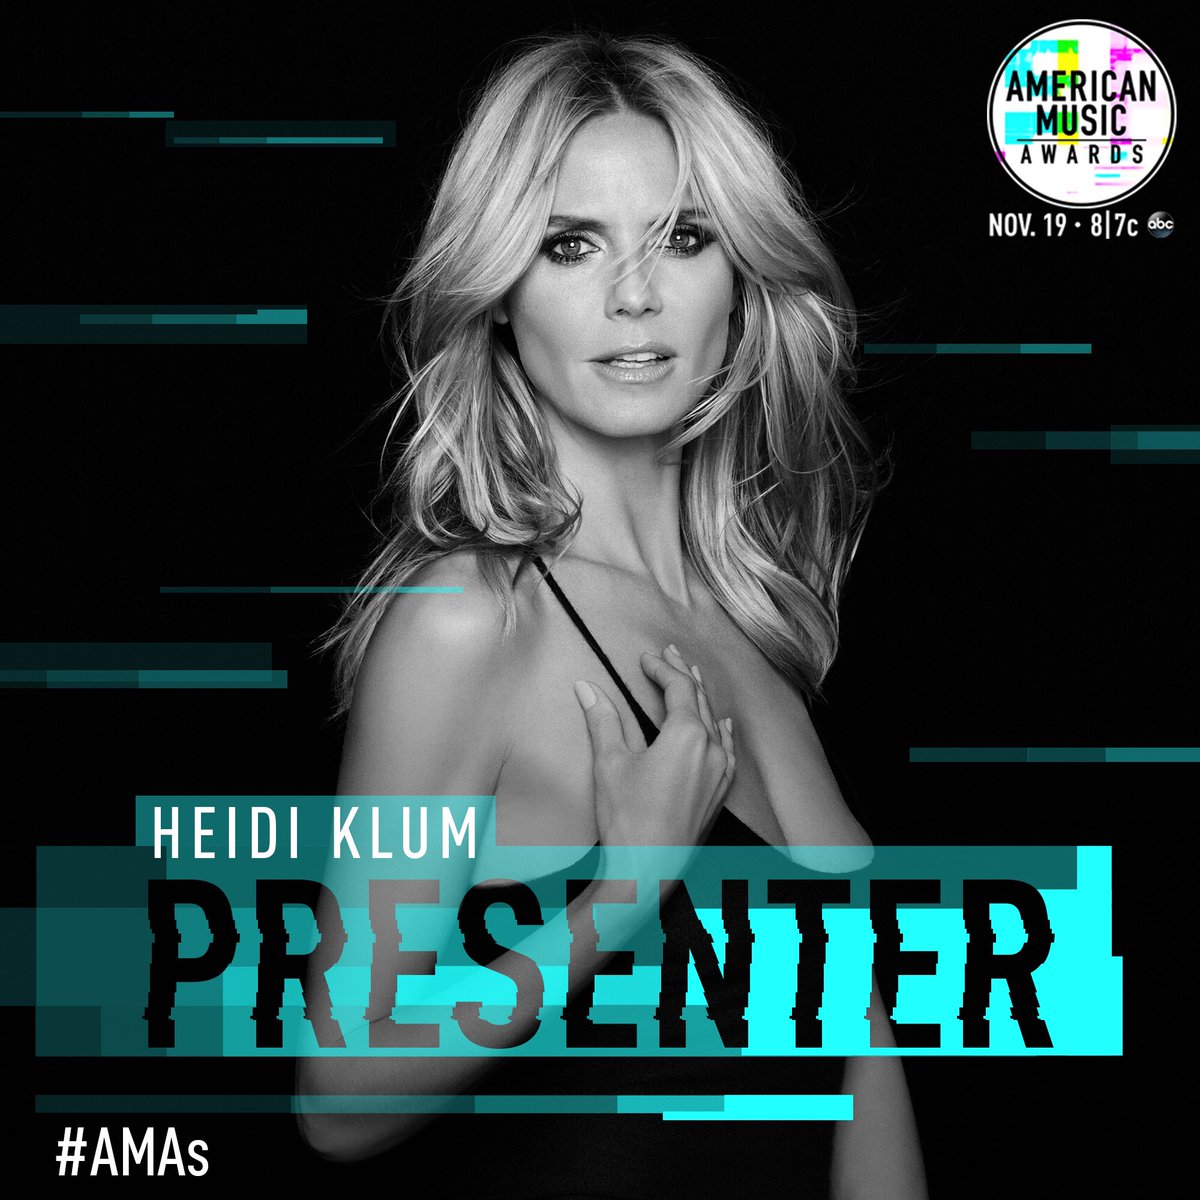 Excited to present at the @AMAs this Sunday! Don’t miss it at 8/7c on ABC #AMAs ????: #FrancescoCarrozzini https://t.co/HTZhd5PvGH